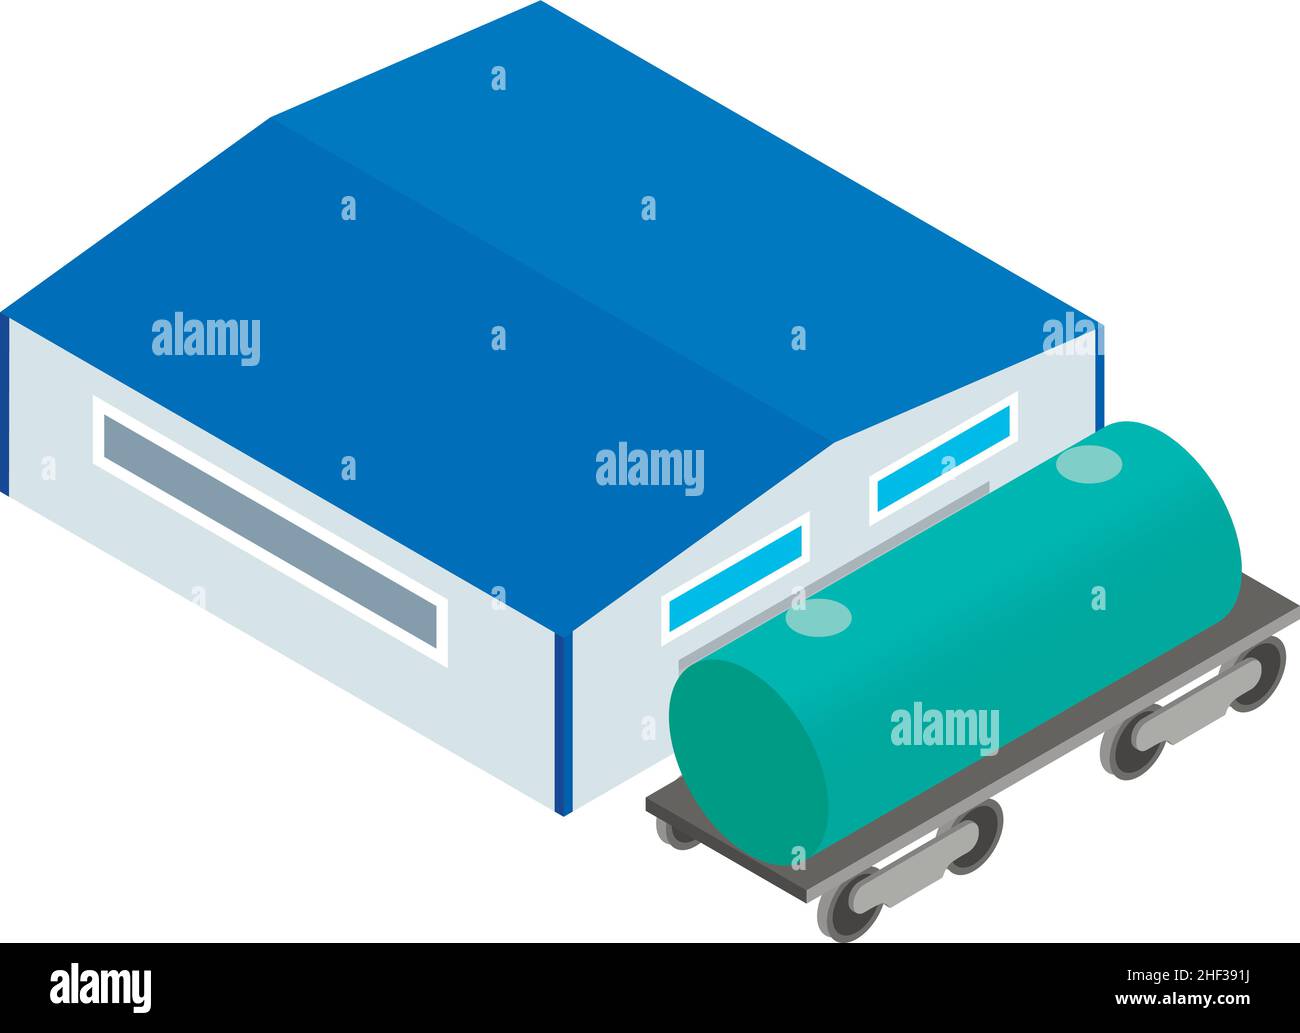 Fuel transportation icon isometric vector. Fuel tank near hangar building icon. Fuelenergy complex, transportation, delivery, storage Stock Vector